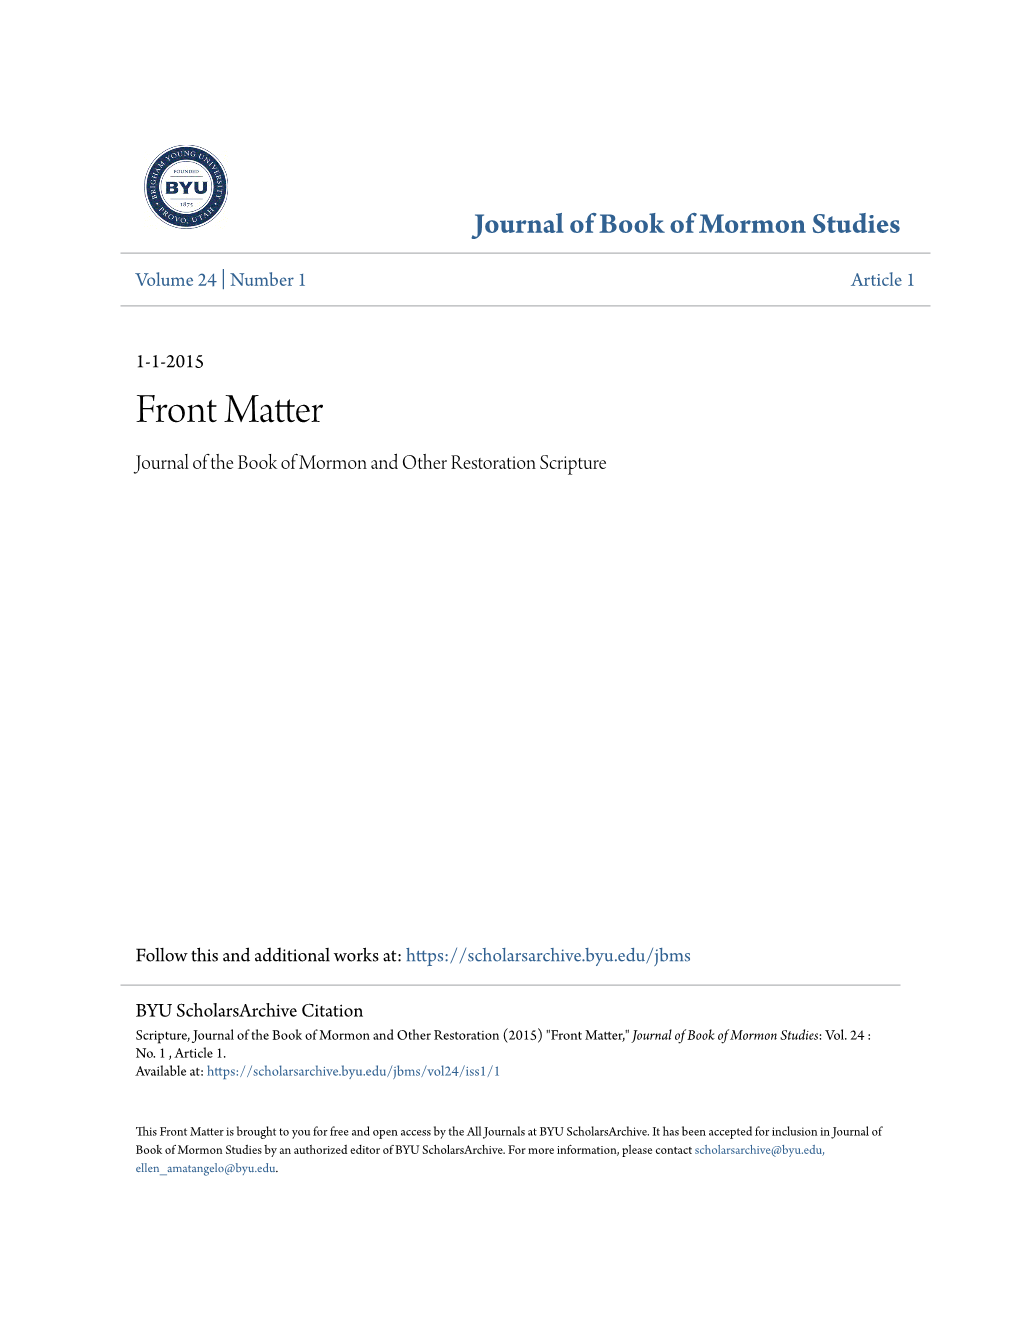 Front Matter Journal of the Book of Mormon and Other Restoration Scripture